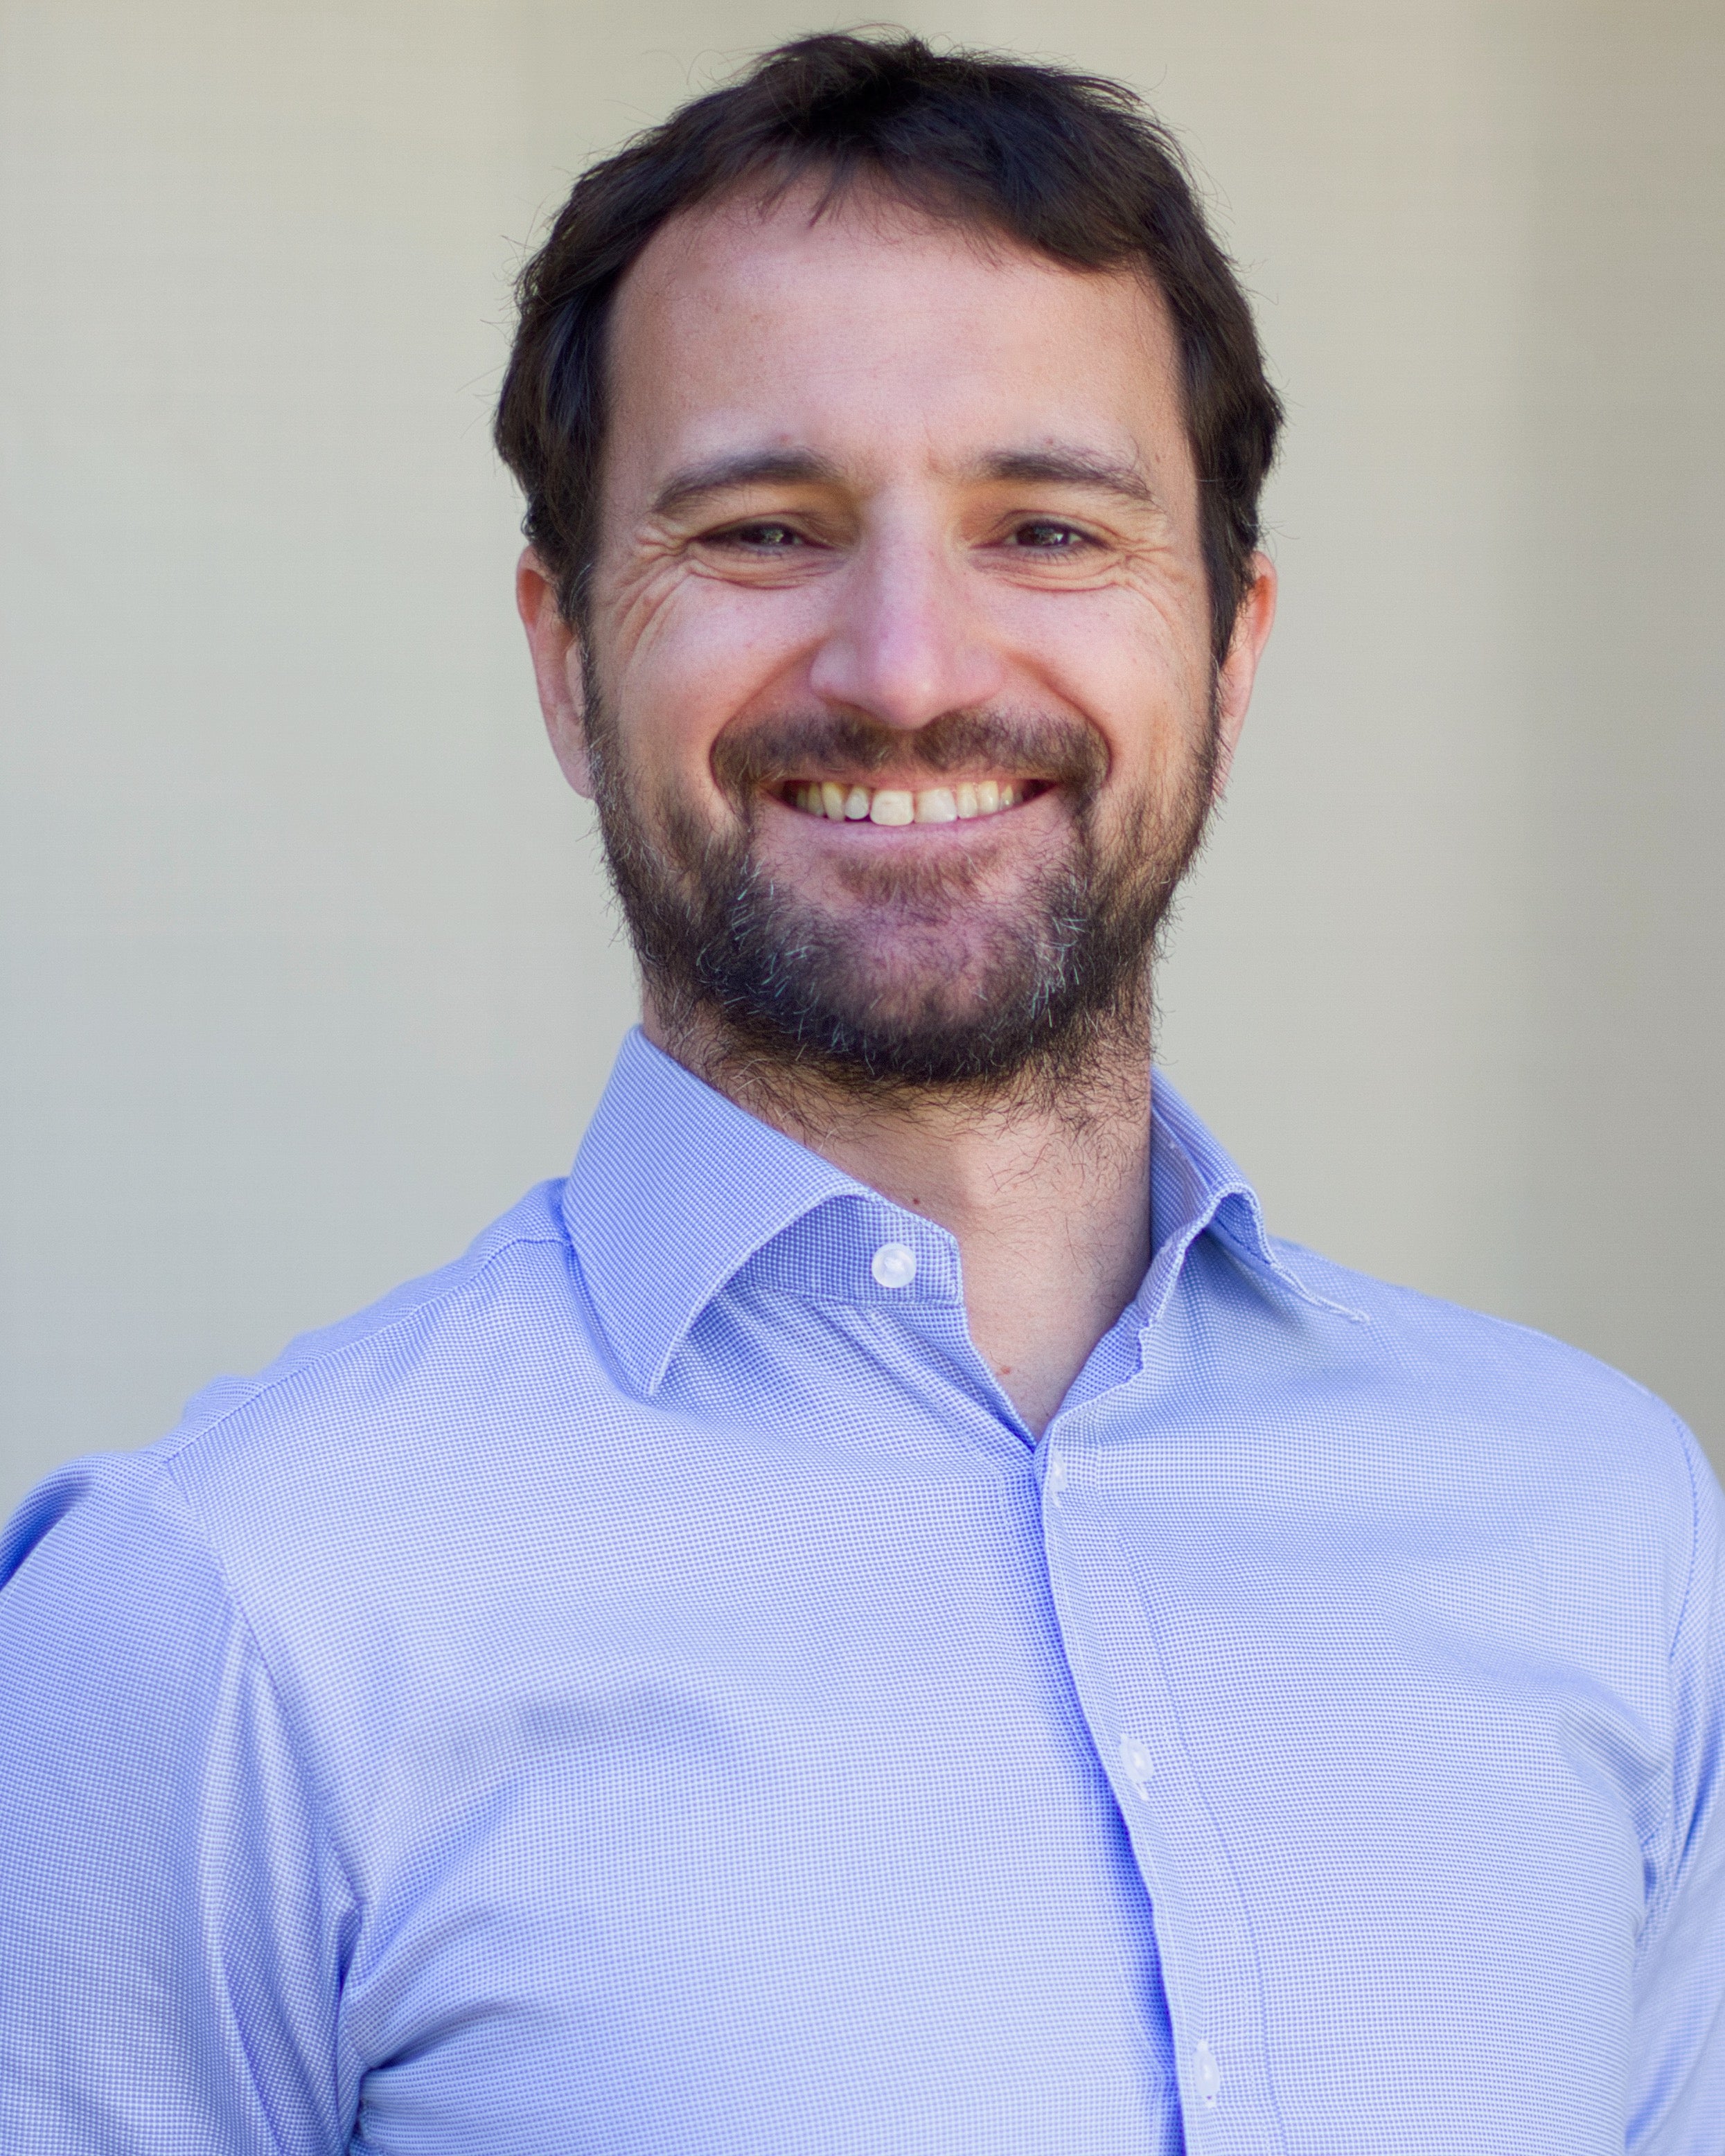 Head shot of UC Davis agronomist Alessandro Ossola, smiling in light blue button-up shirt